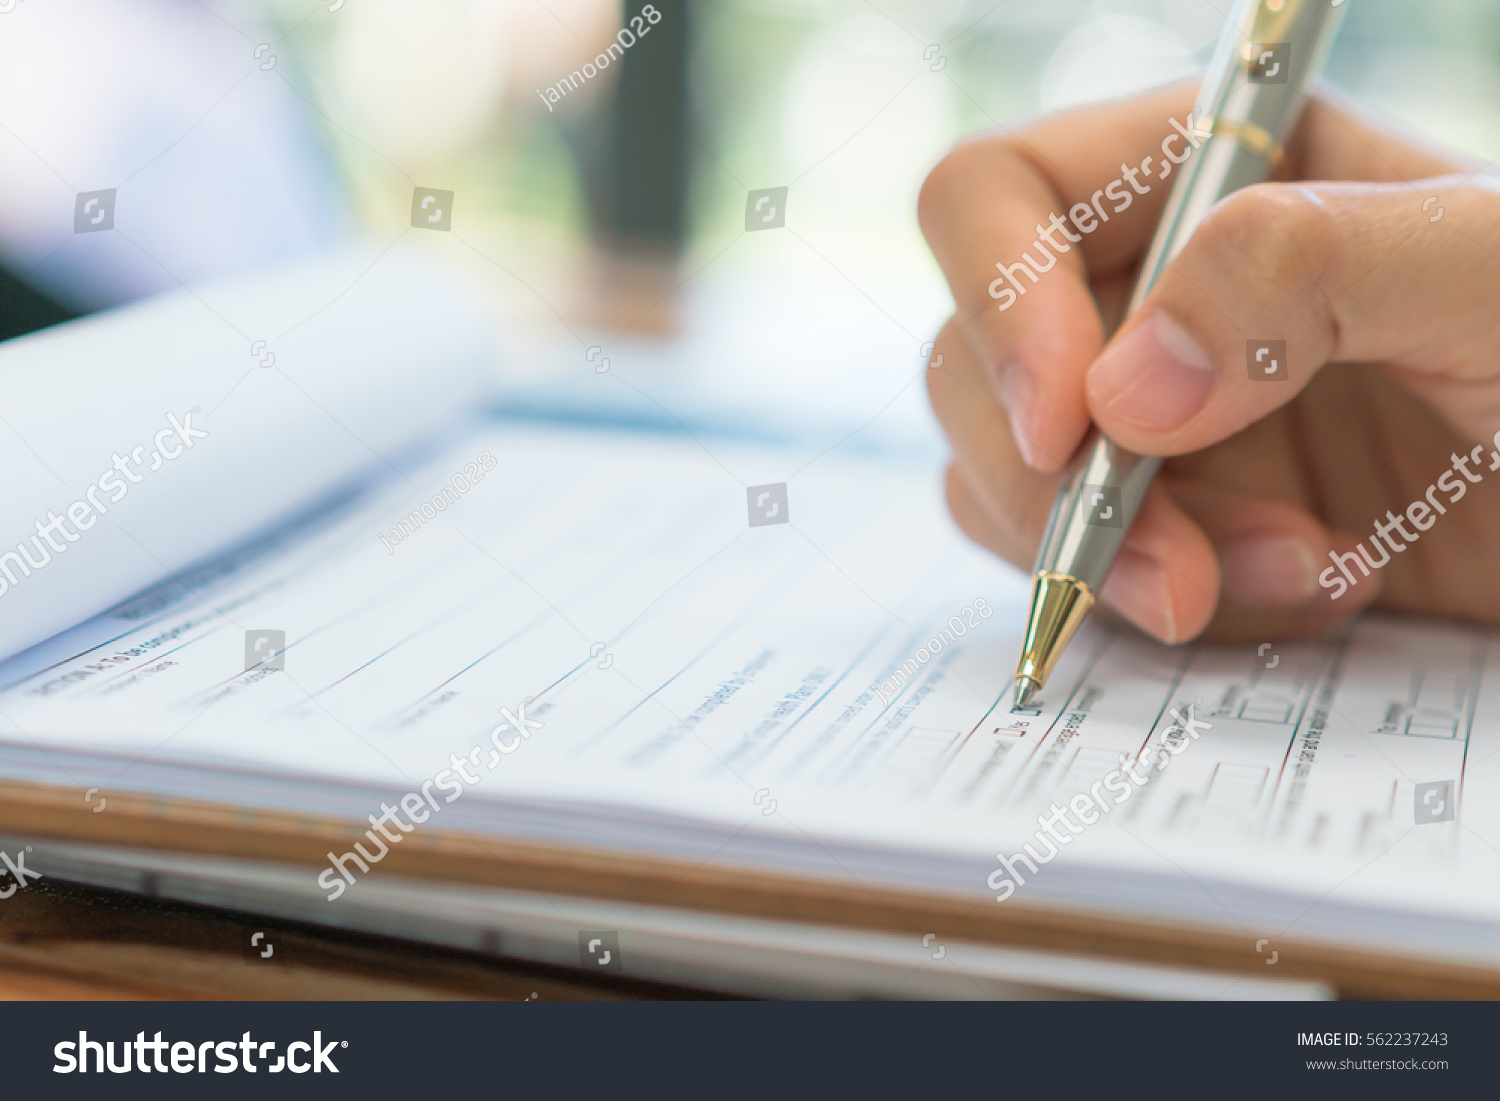 Hand with pen over application form #562237243